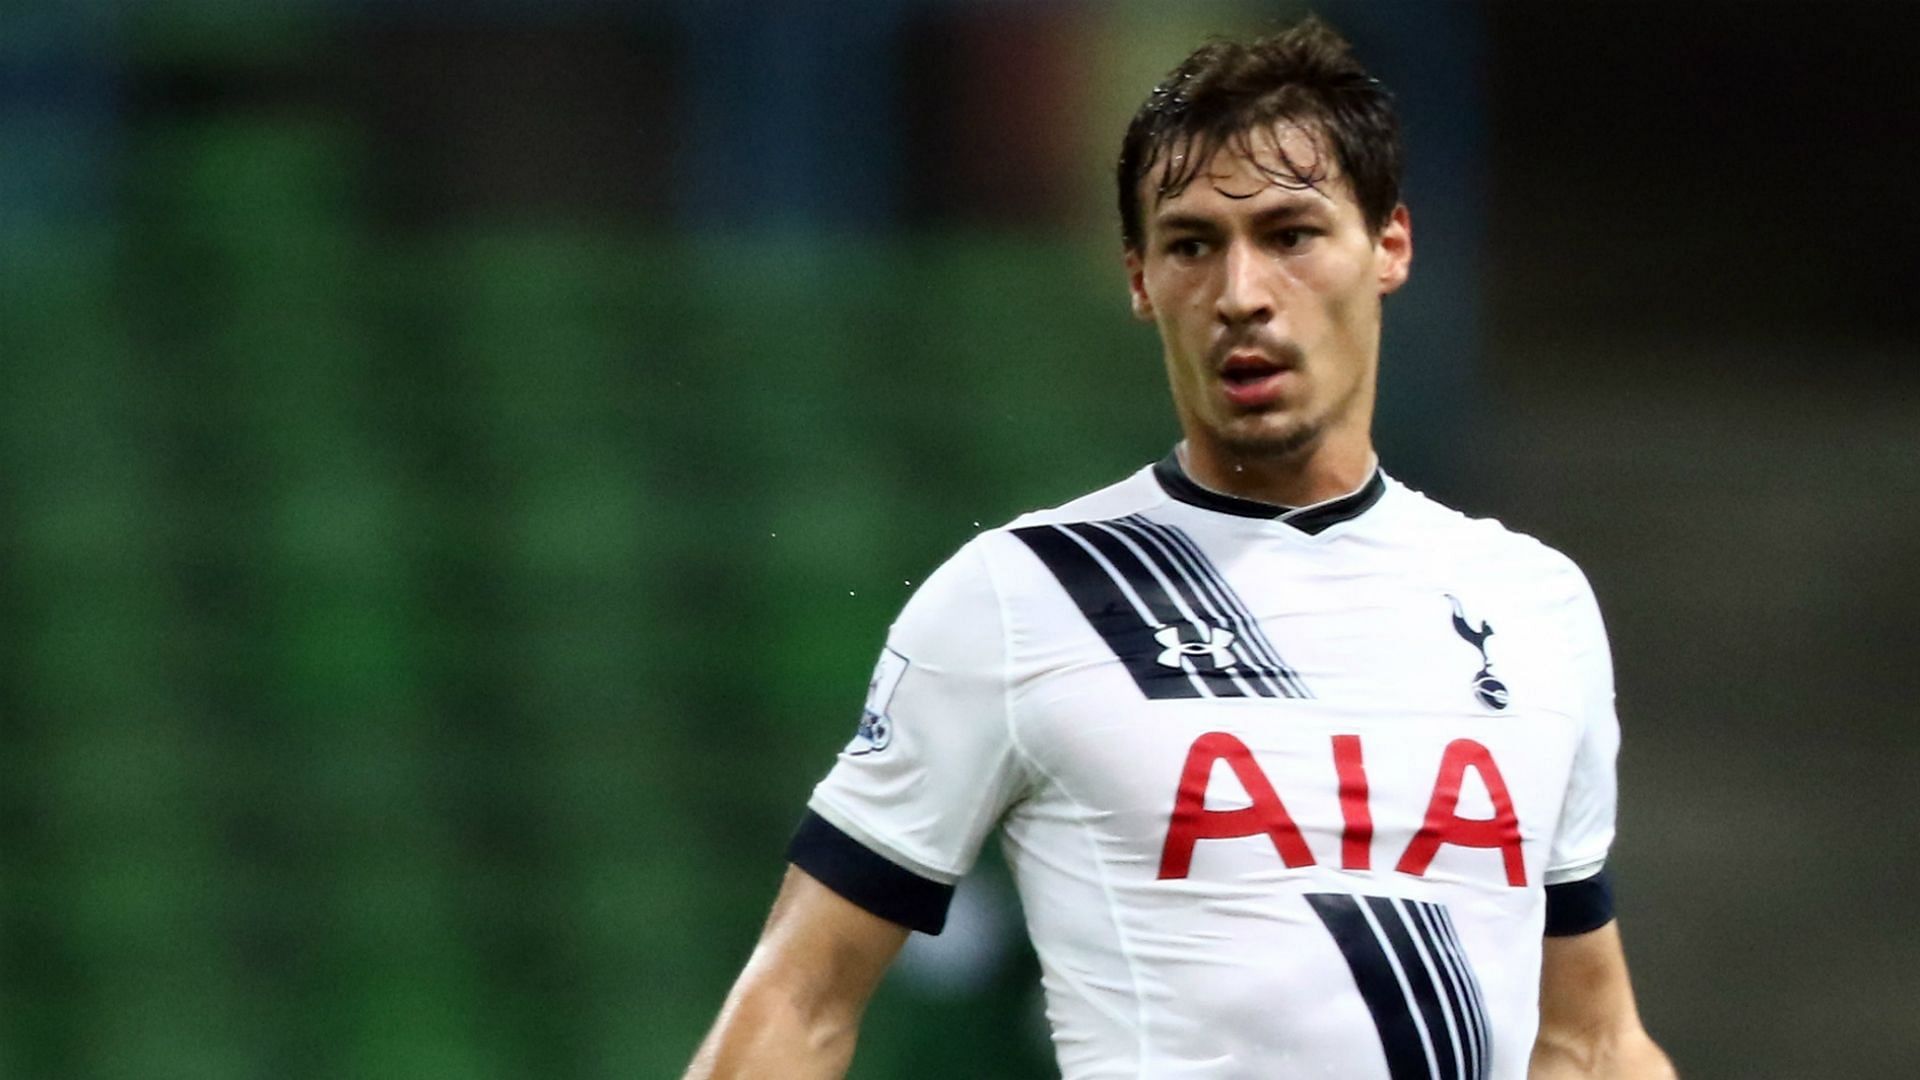 Benjamin Stambouli was signed by PSG after one season at Tottenham Hotspur